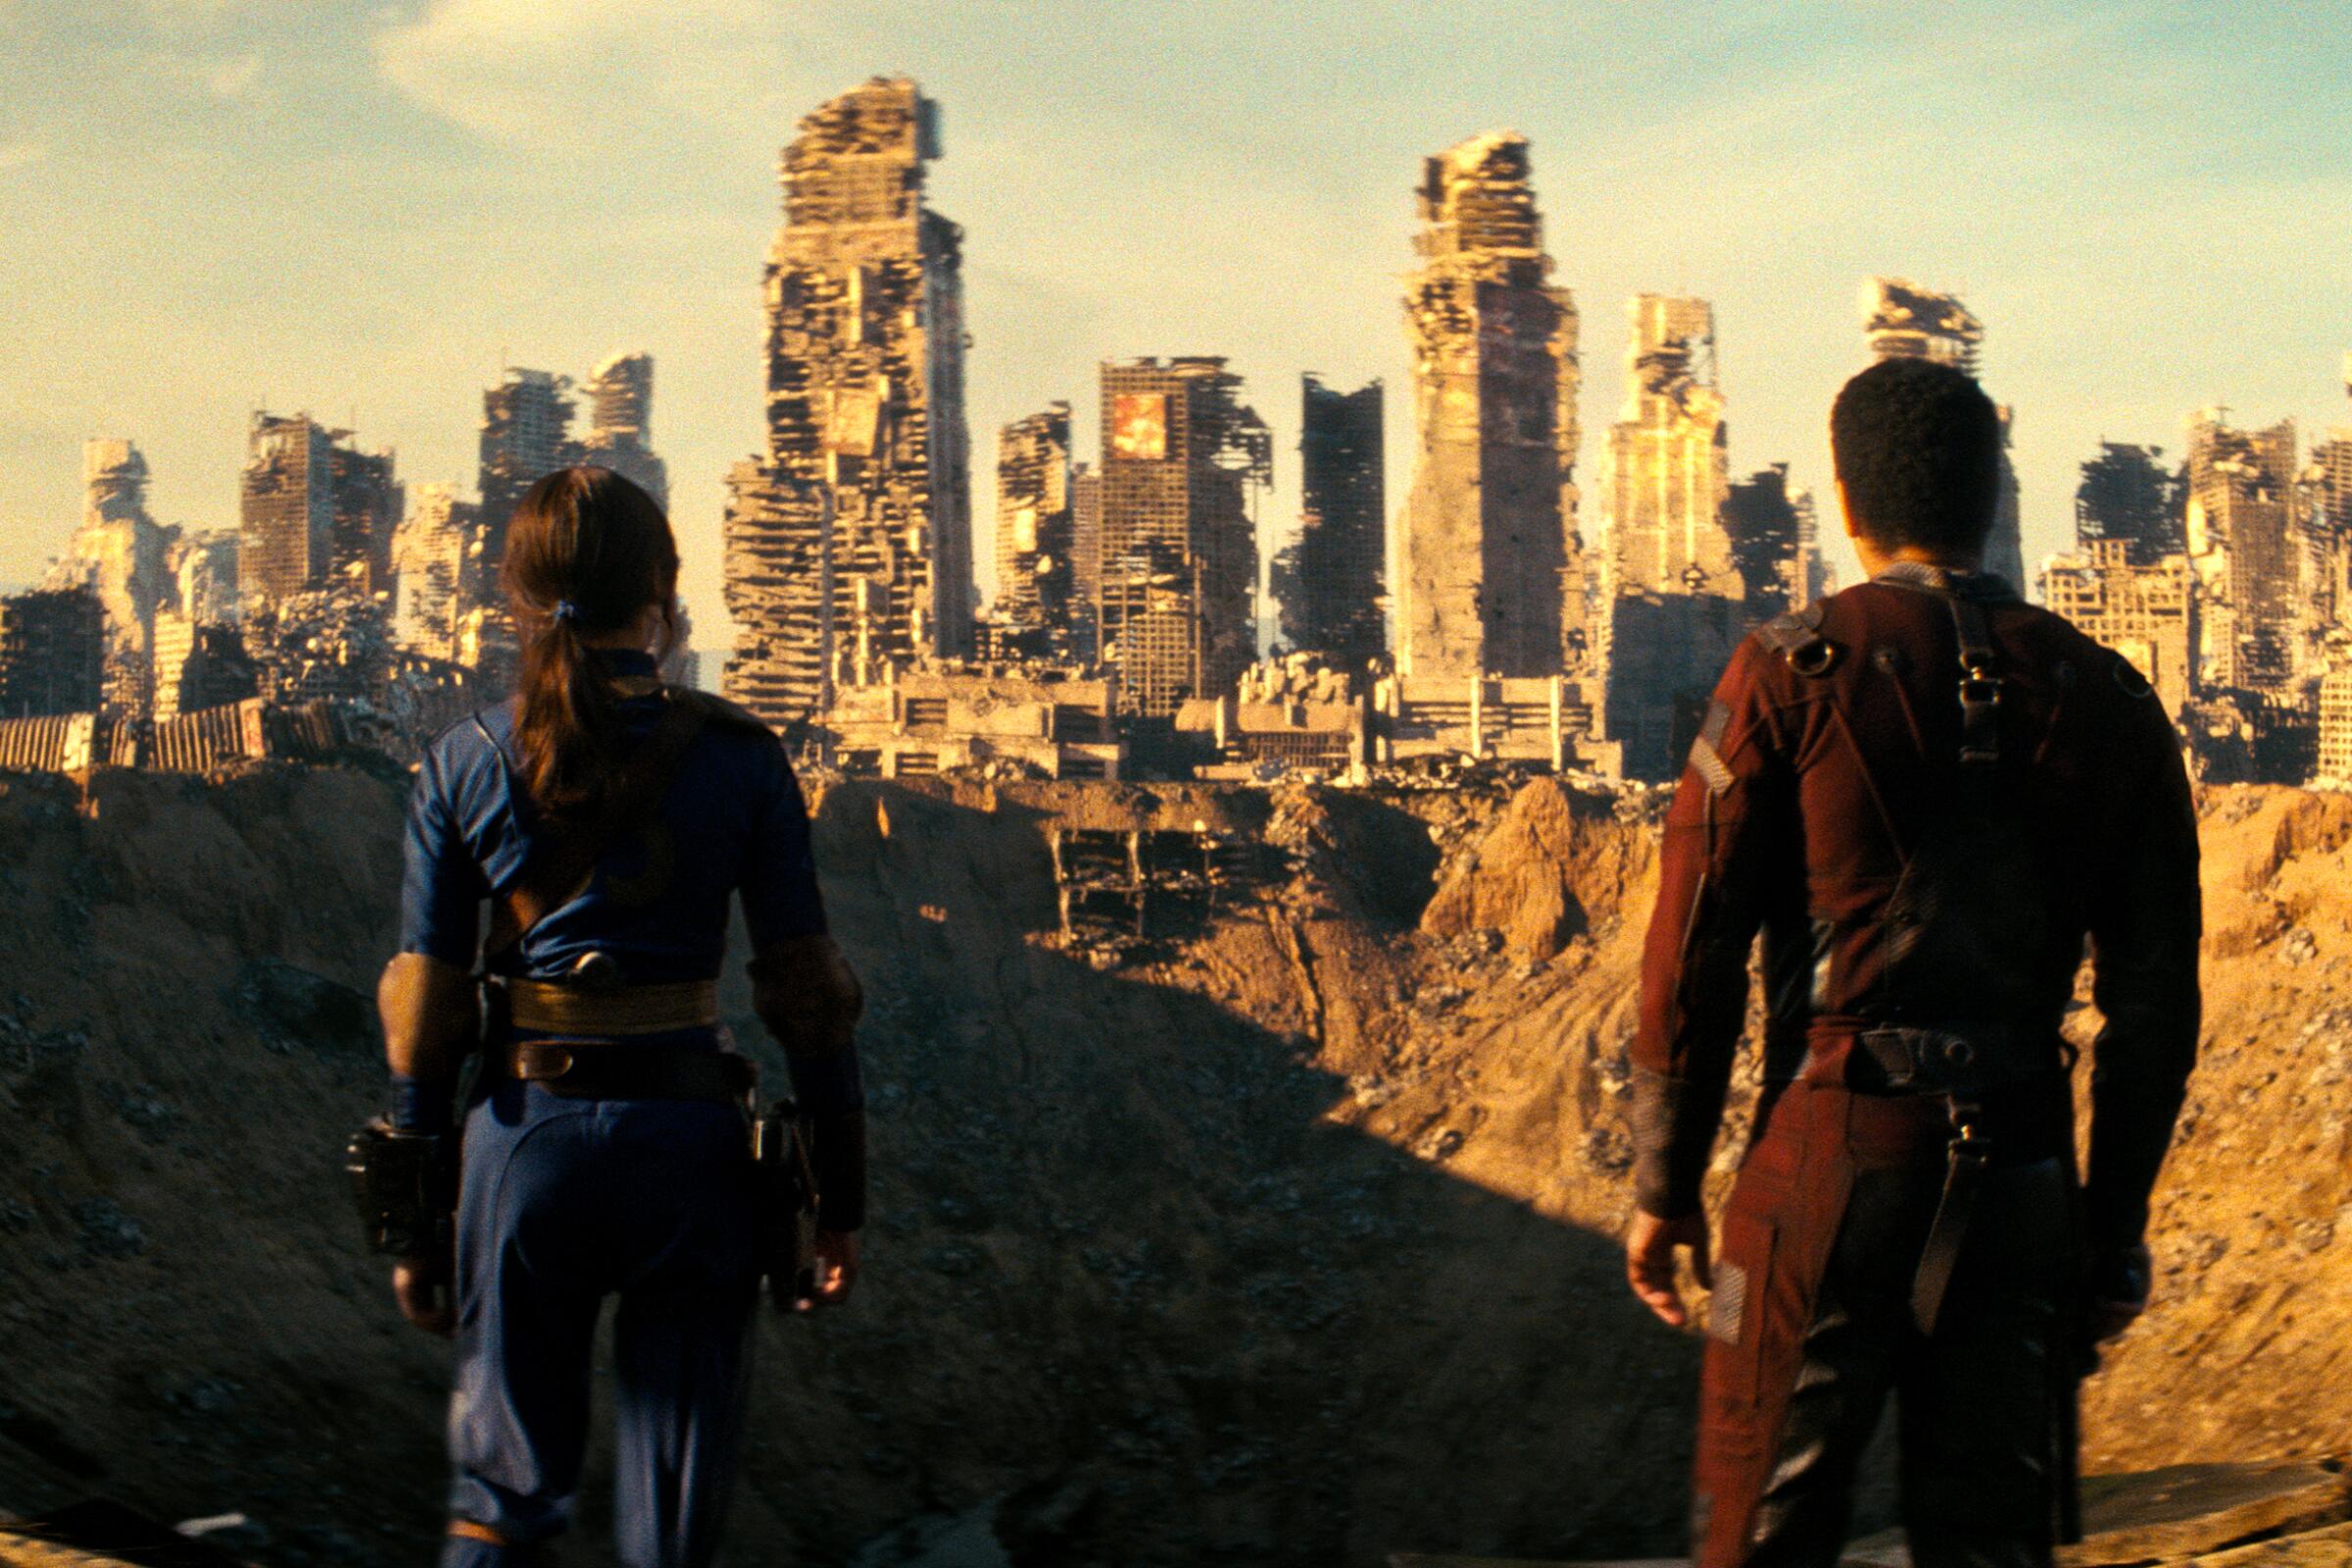 A man and woman look out over a crater with destroyed buildings in the background in "Fallout."